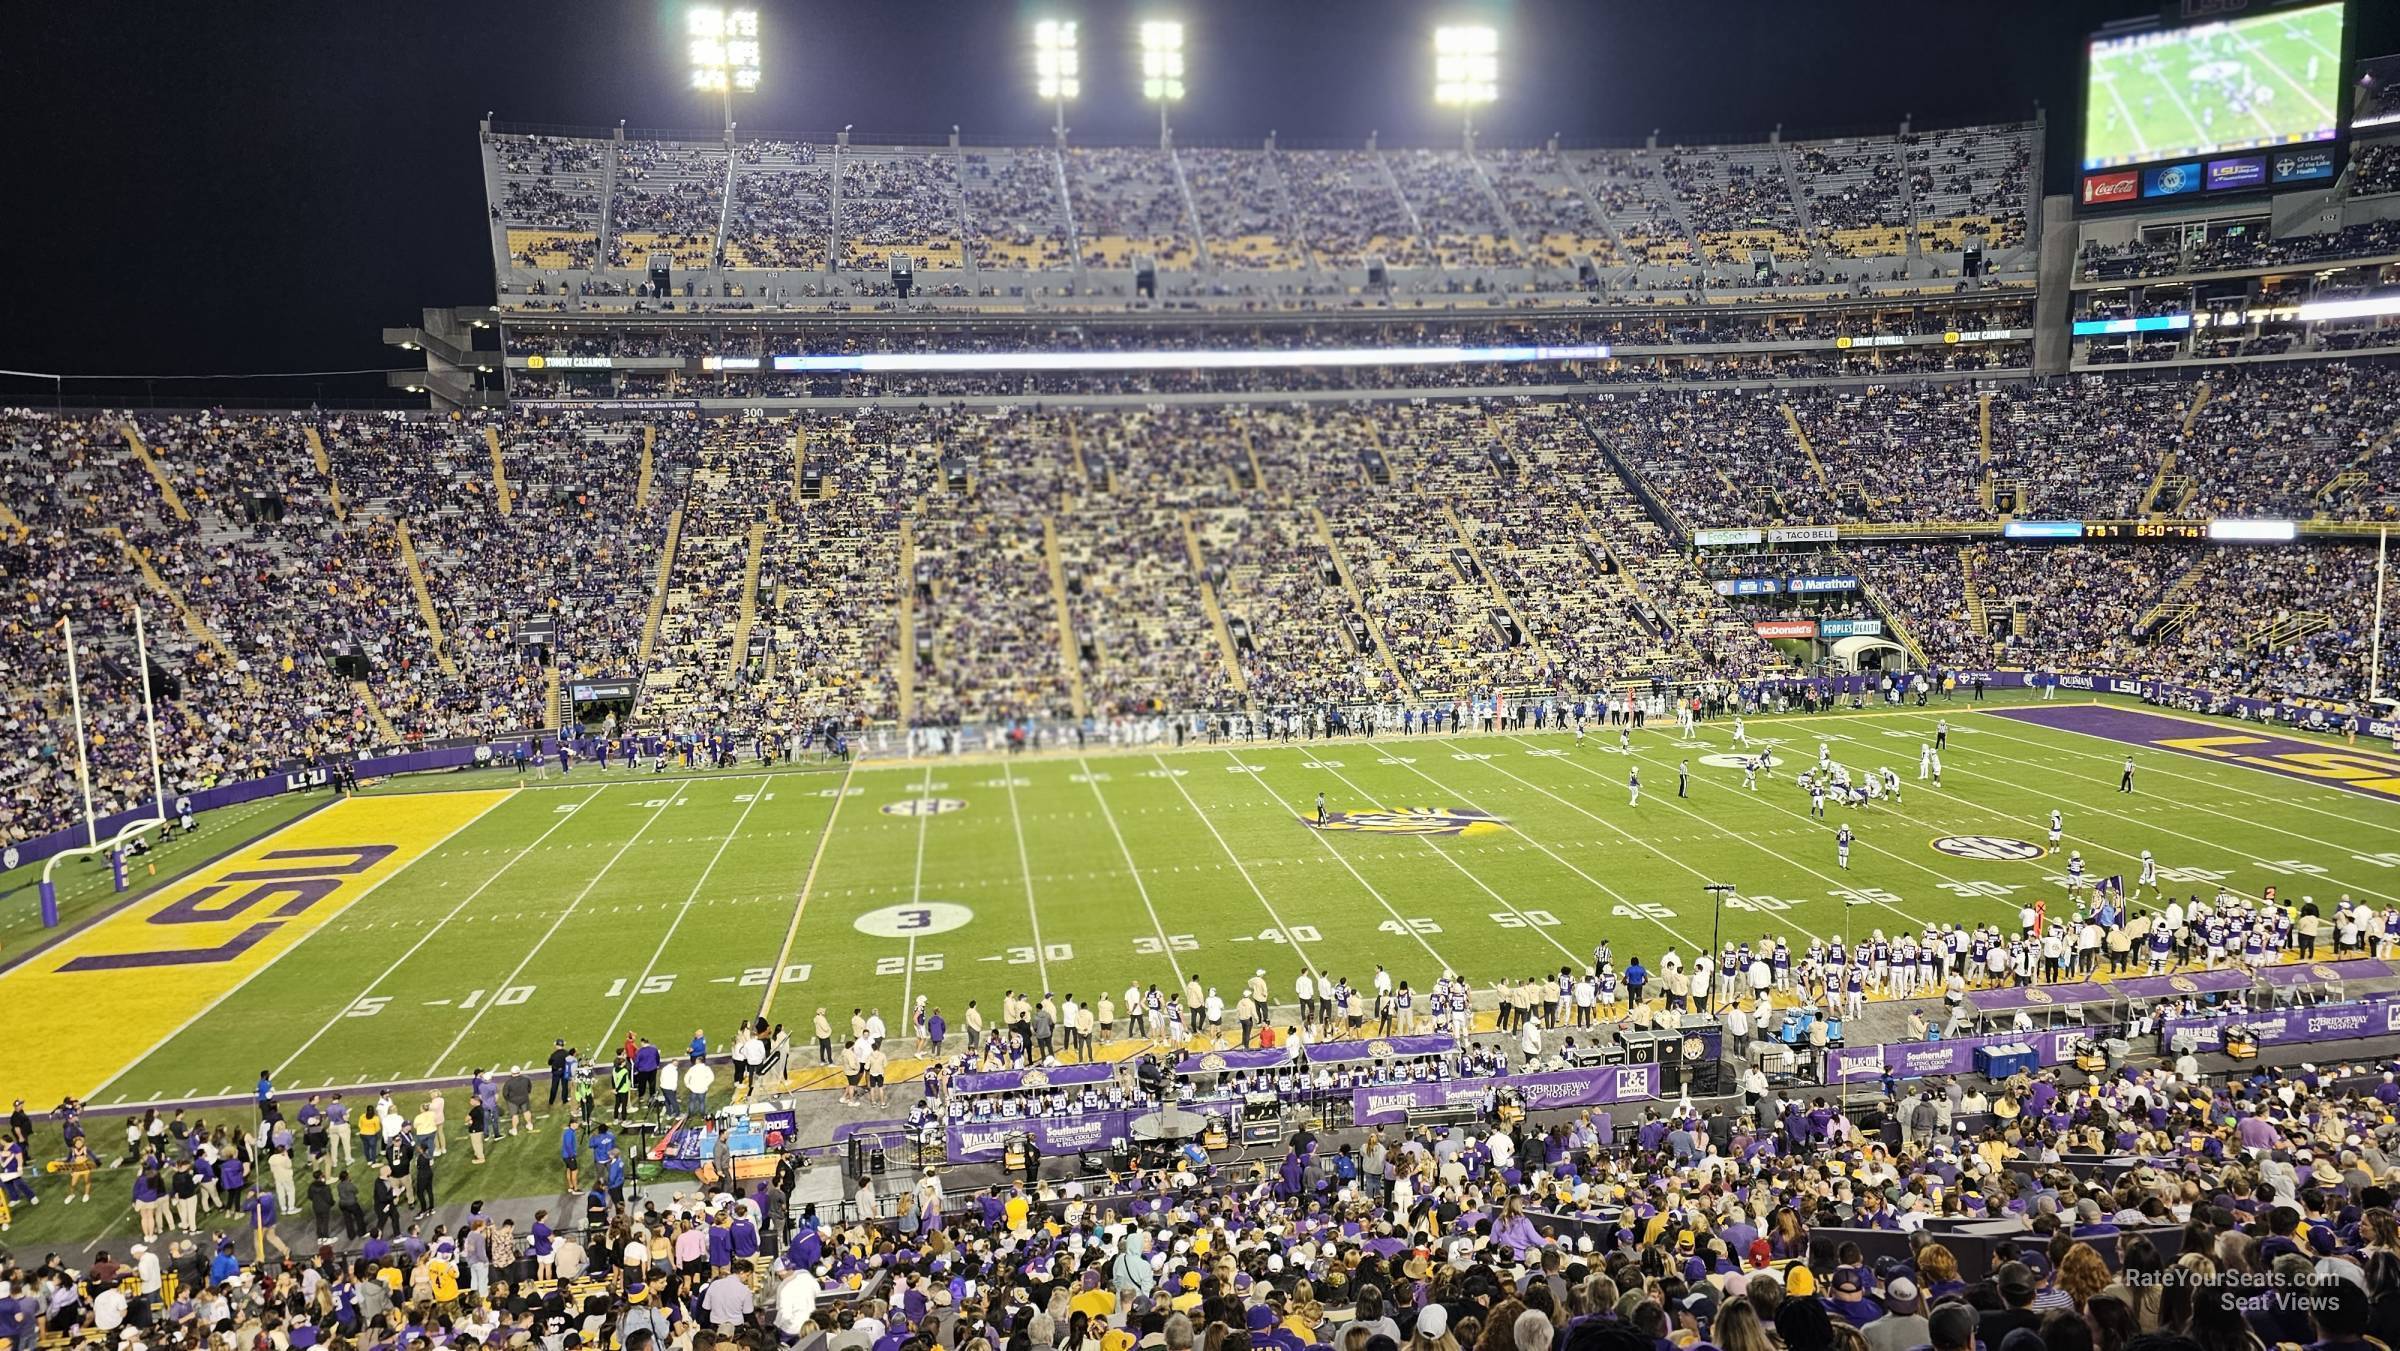 section 105, row 48 seat view  - tiger stadium